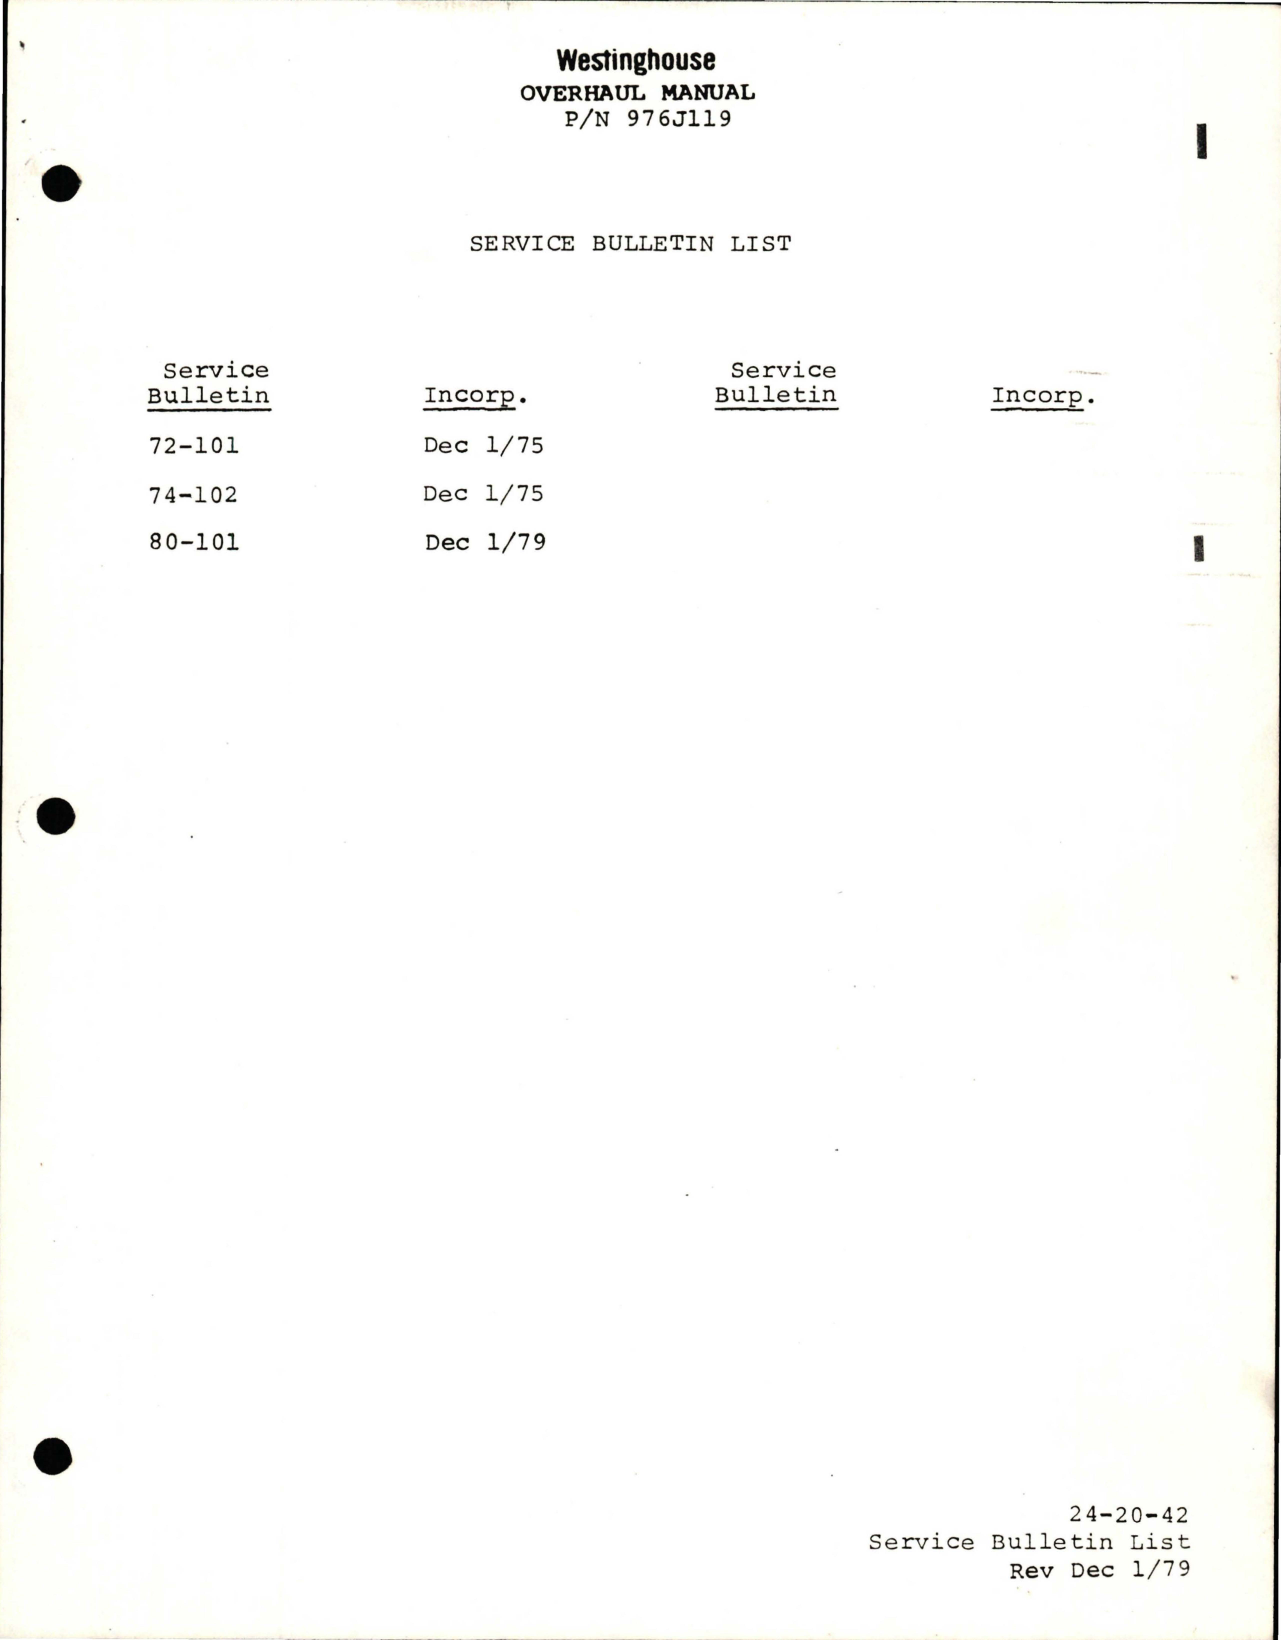 Sample page 5 from AirCorps Library document: Overhaul Manual for AC Generator 